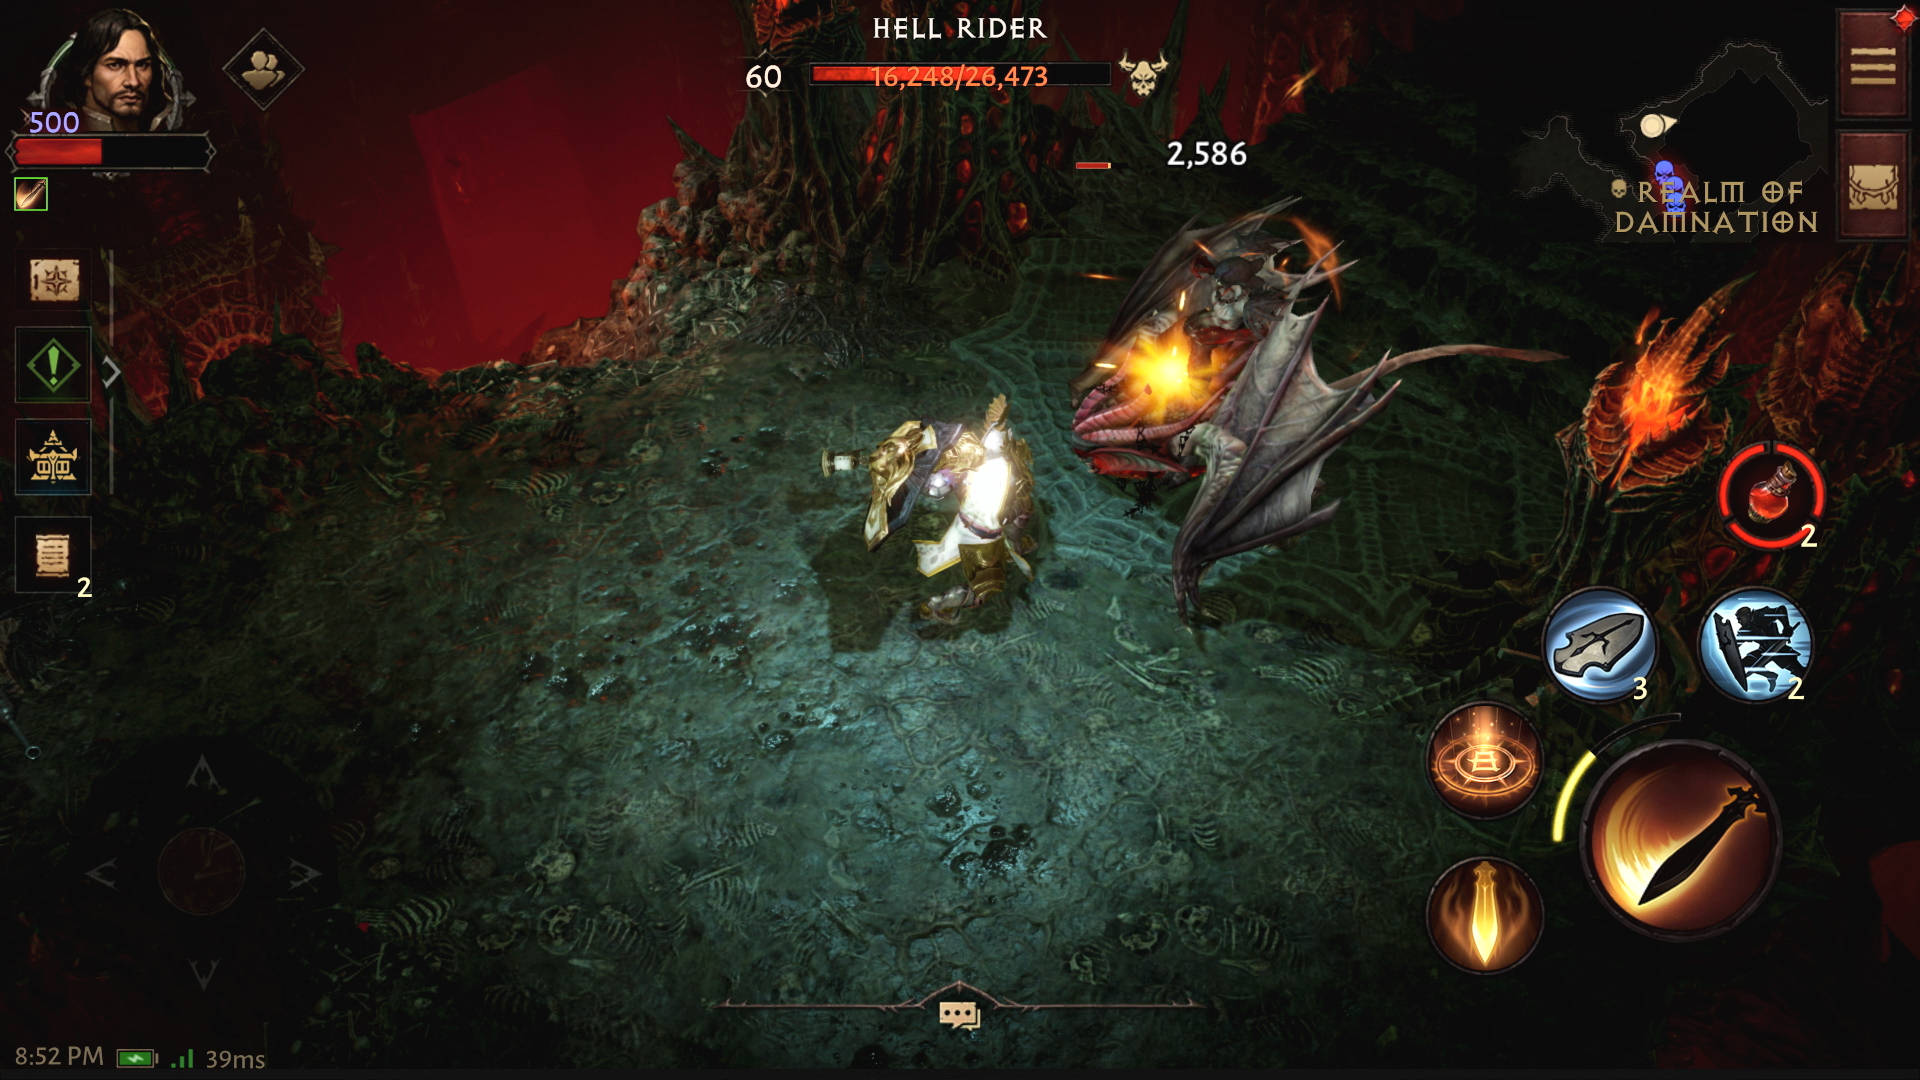 Best Diablo Immortal items: a Crusader slashing a demon in an area covered in bones.